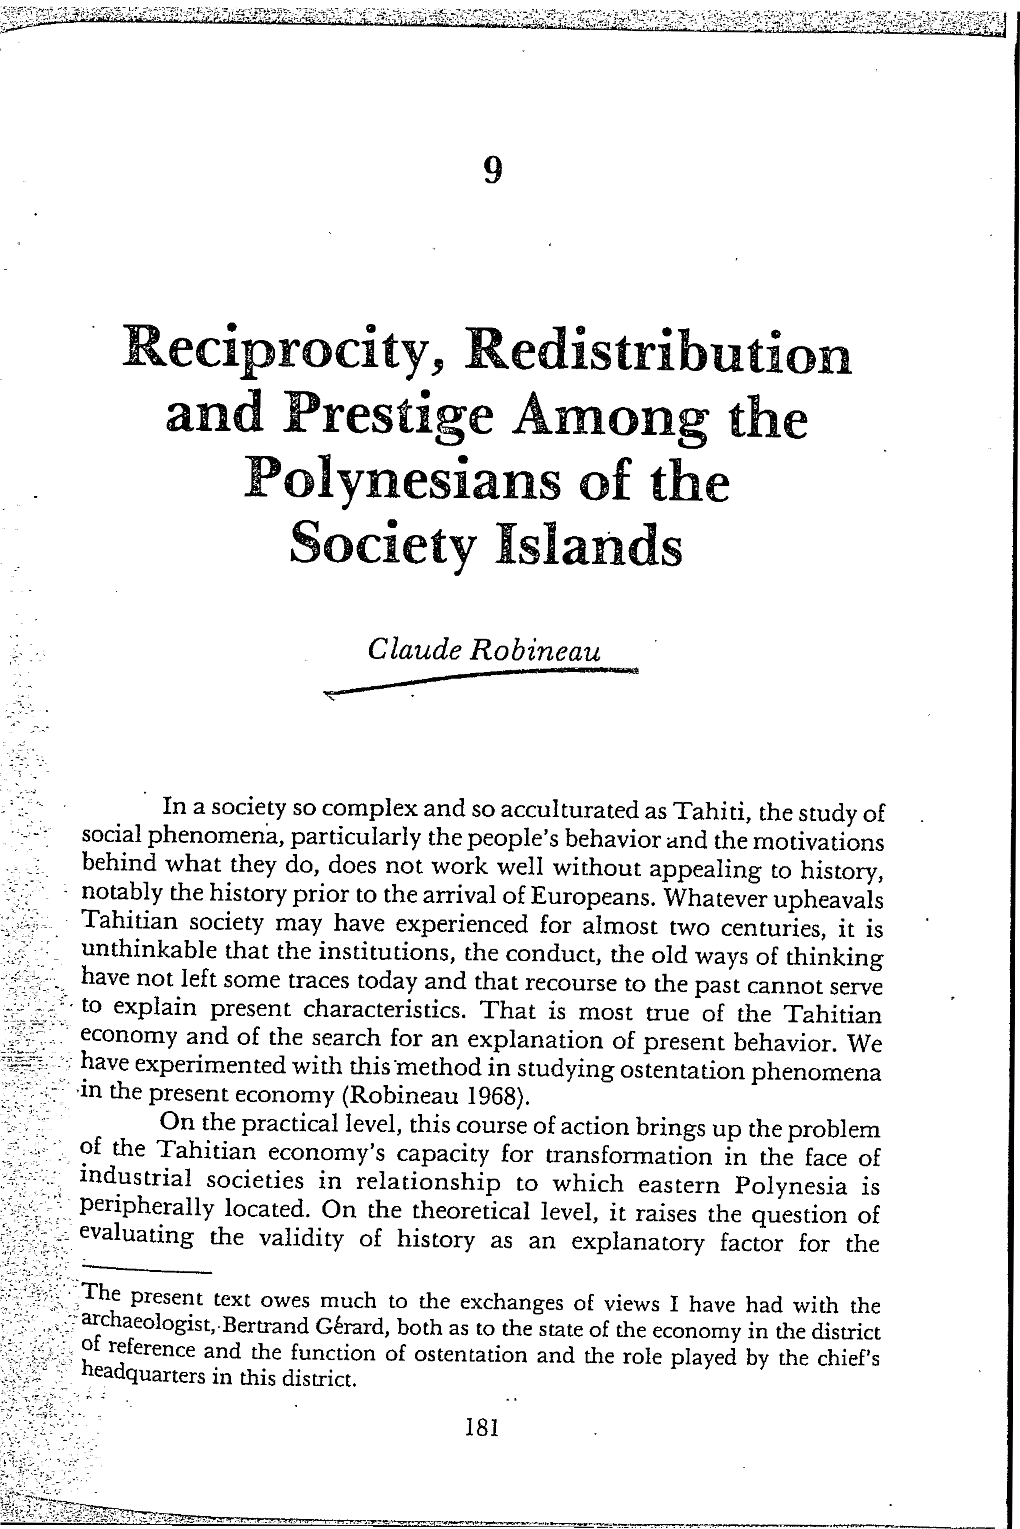 Reciprocity, Redistribution and Prestige Among the Polynesians of the Society Islands